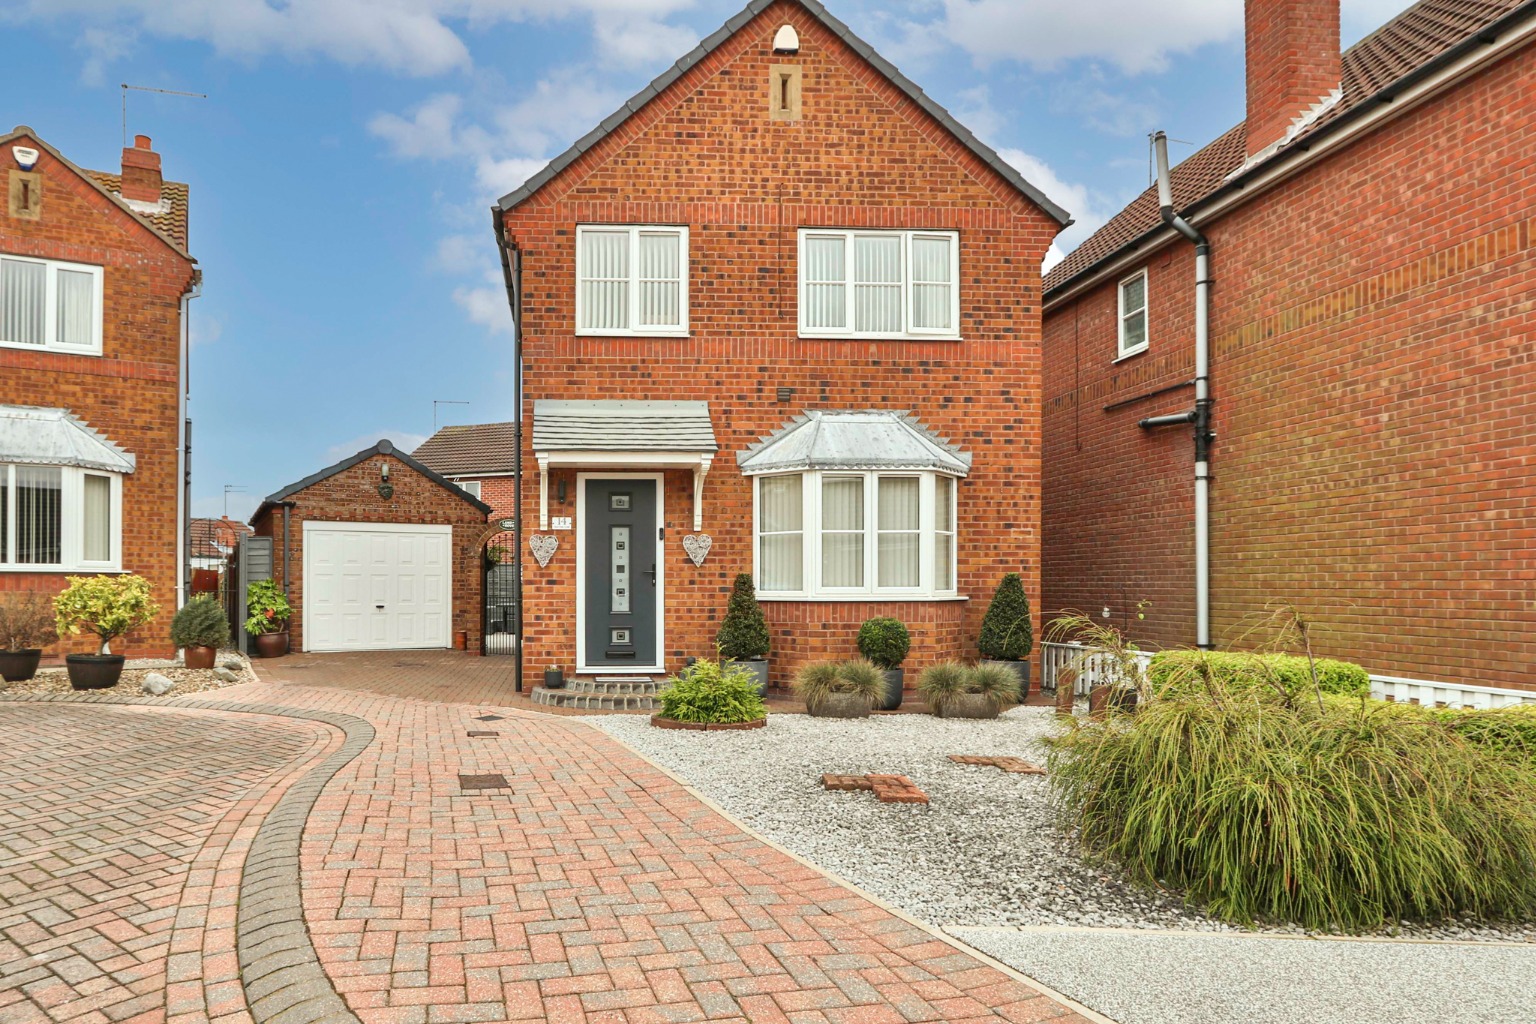 3 bed detached house for sale in Chaytor Close, Hull - Property Image 1